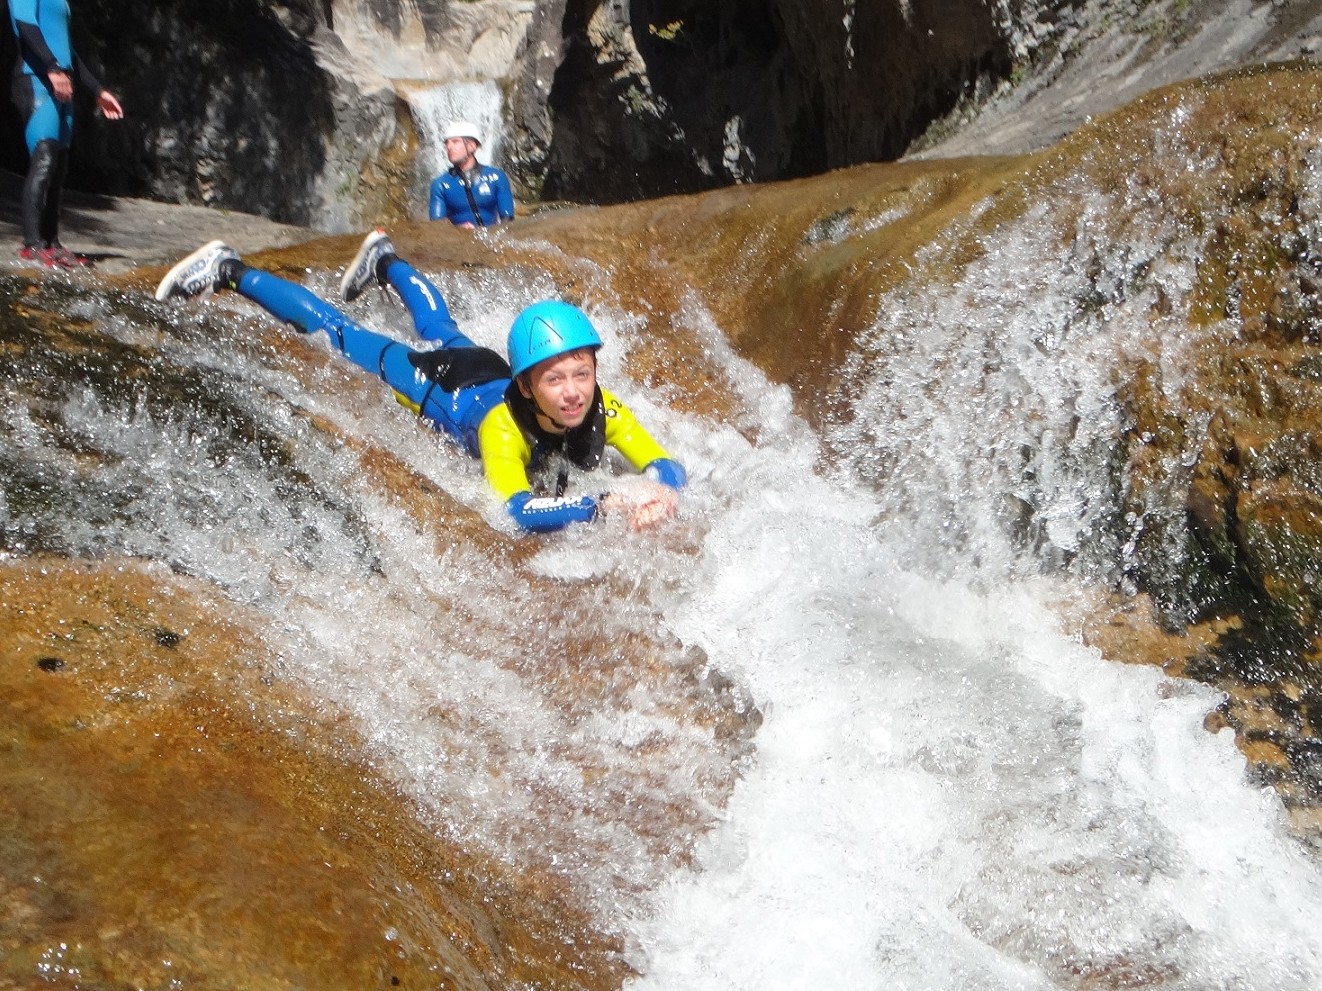 <p>CANYONING NIVEAU <span style="font-family:comic sans ms,cursive"><span style="font-size:18px"><strong>1</strong></span></span></p> 